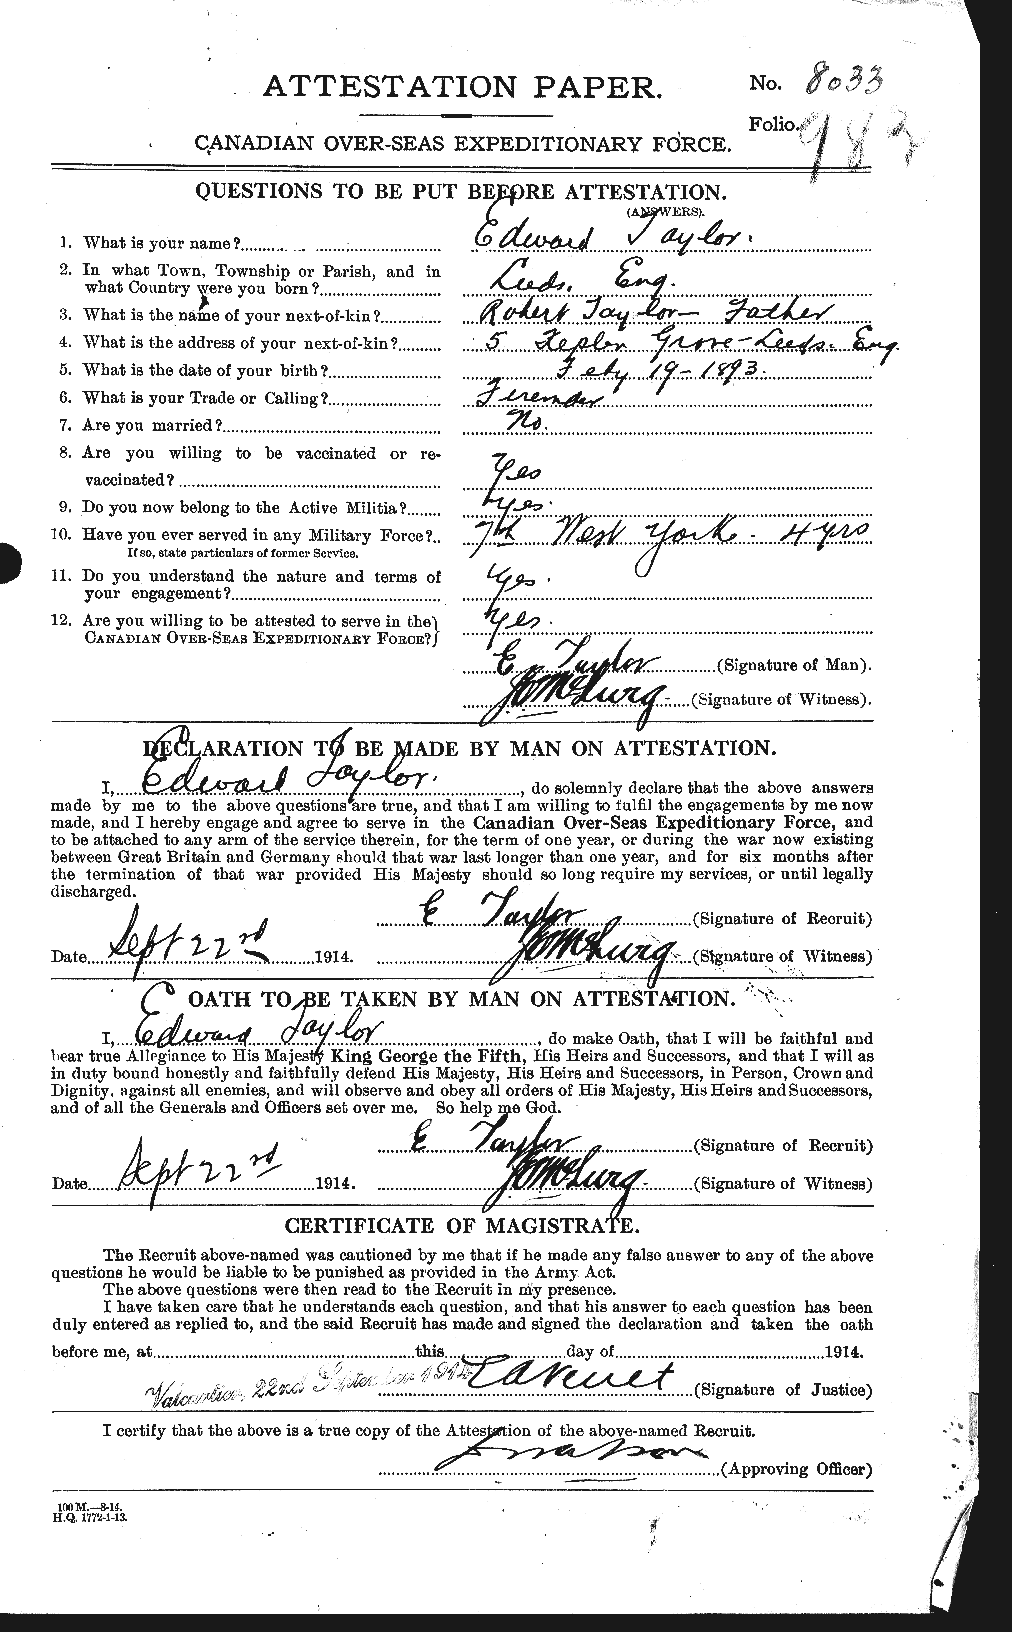 Personnel Records of the First World War - CEF 627295a